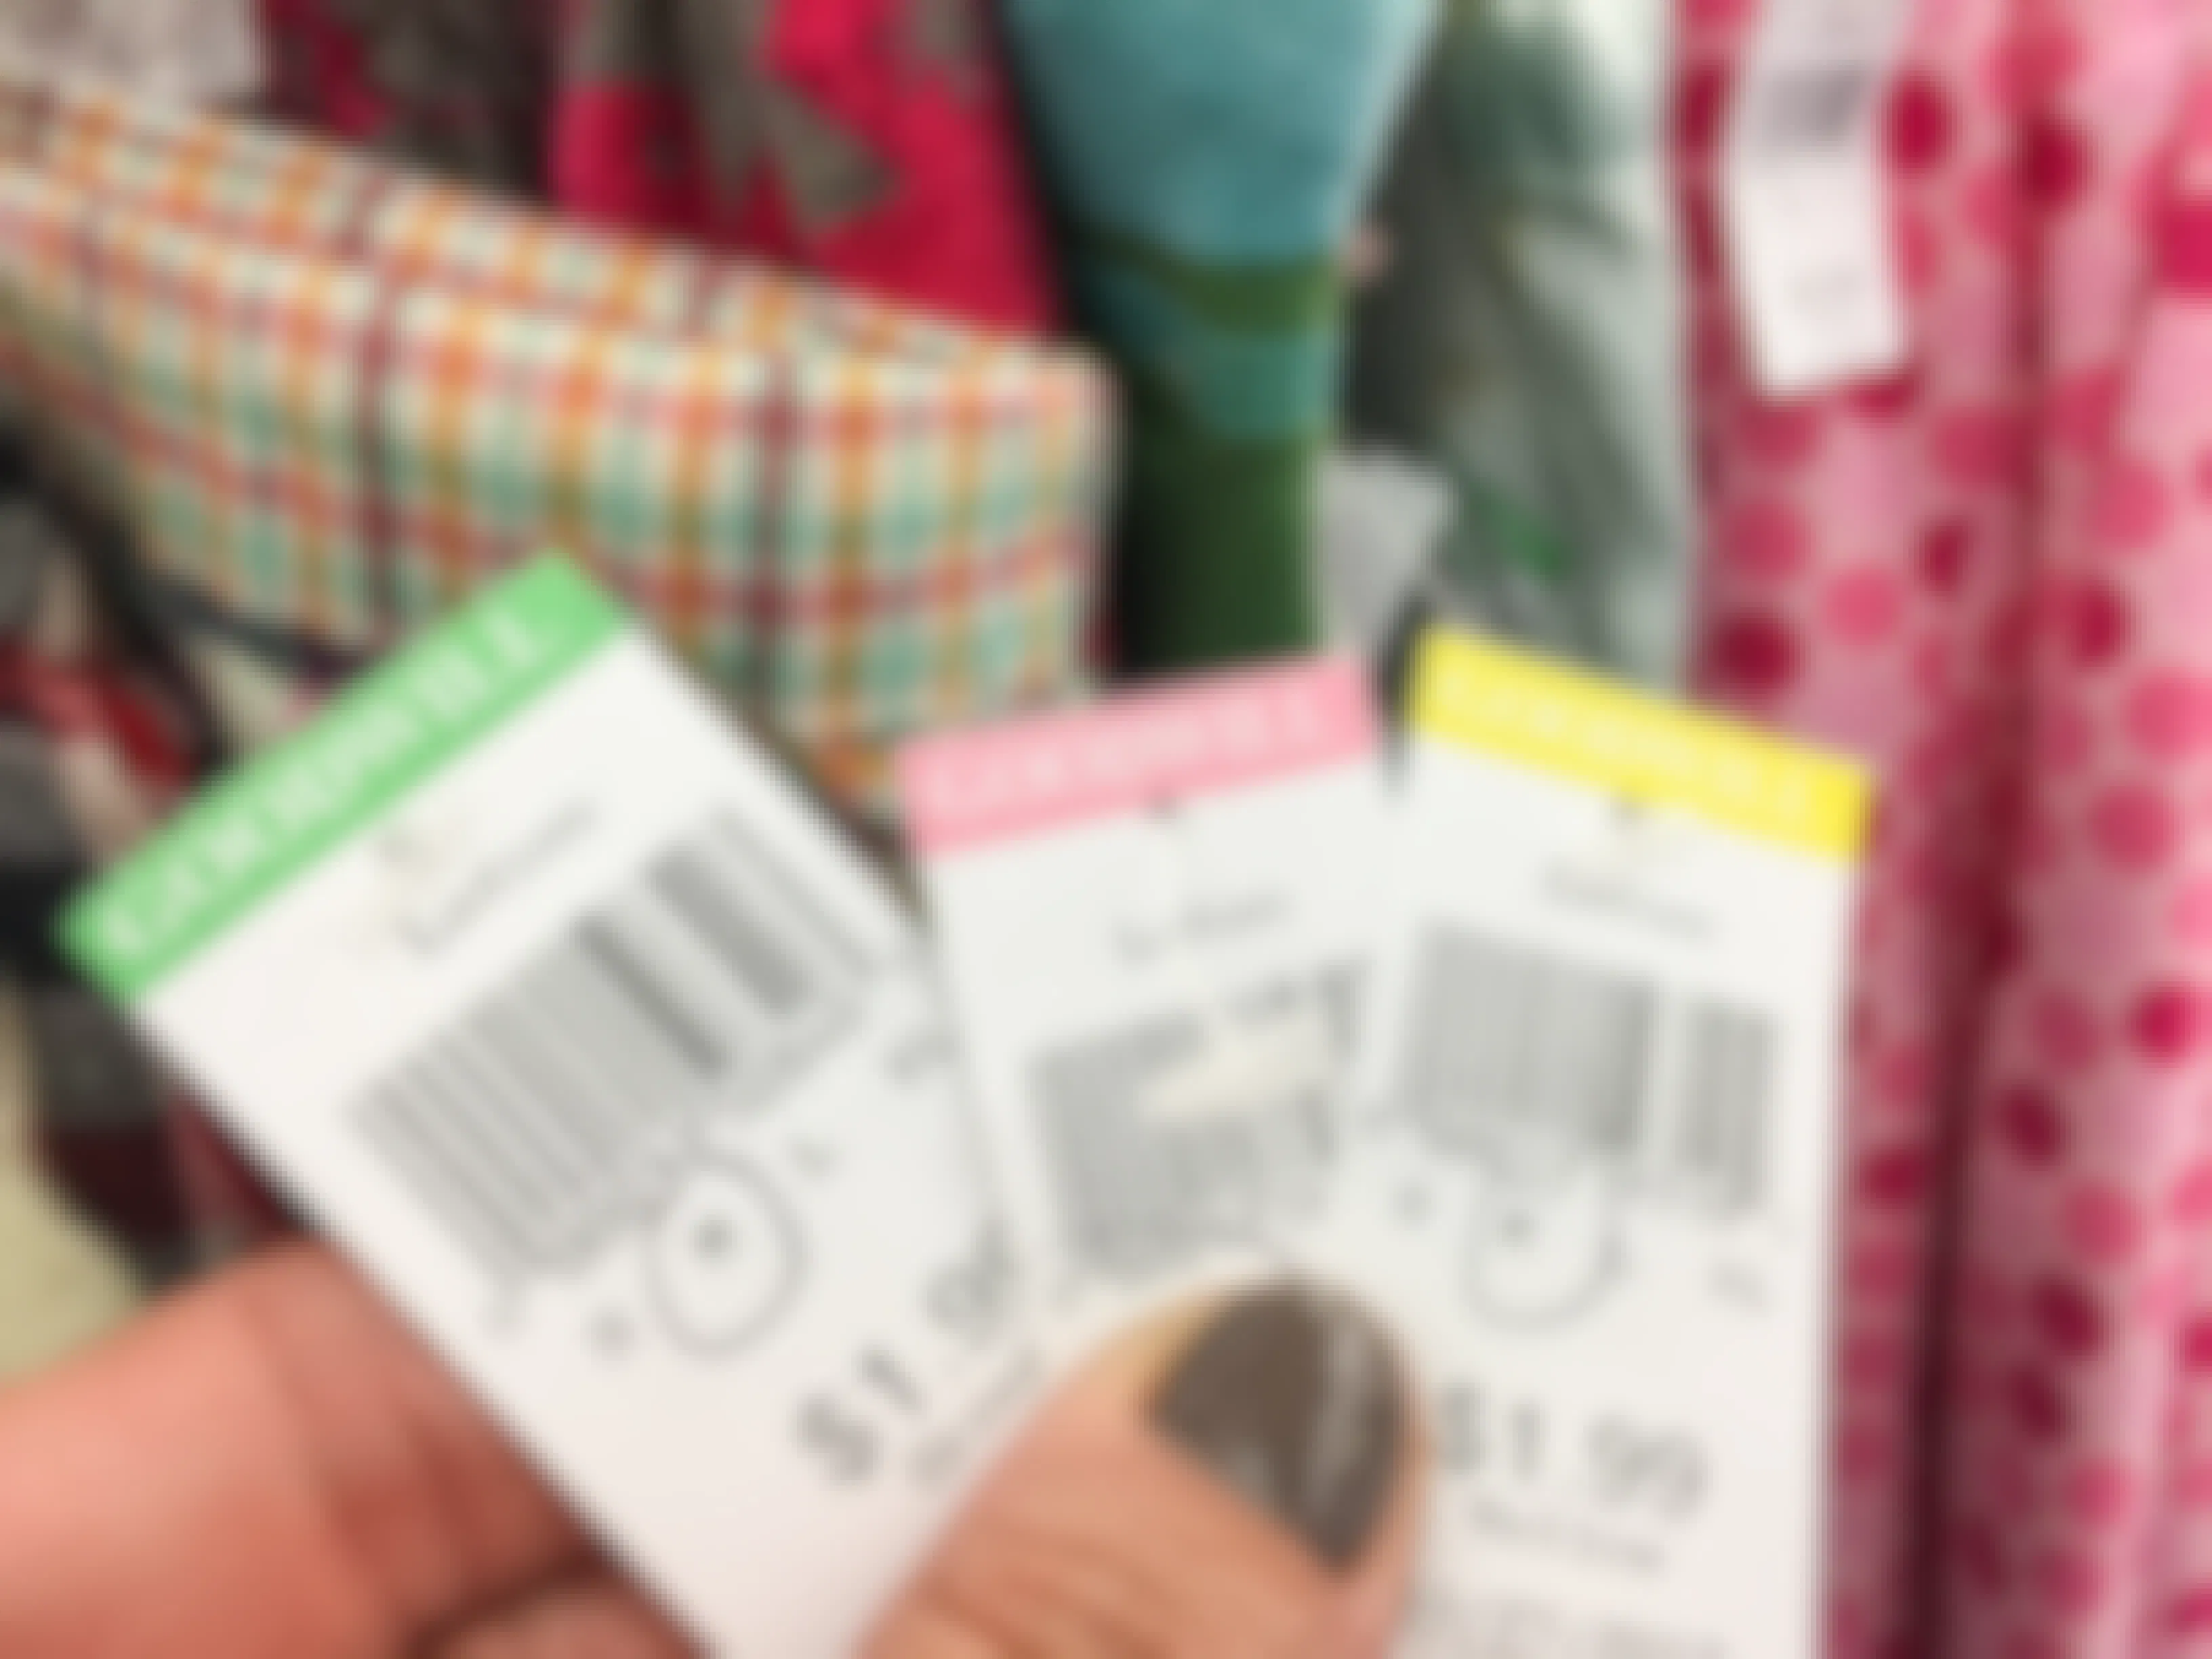 Someone holding up different colored Goodwill price tags in front of a rack of clothing